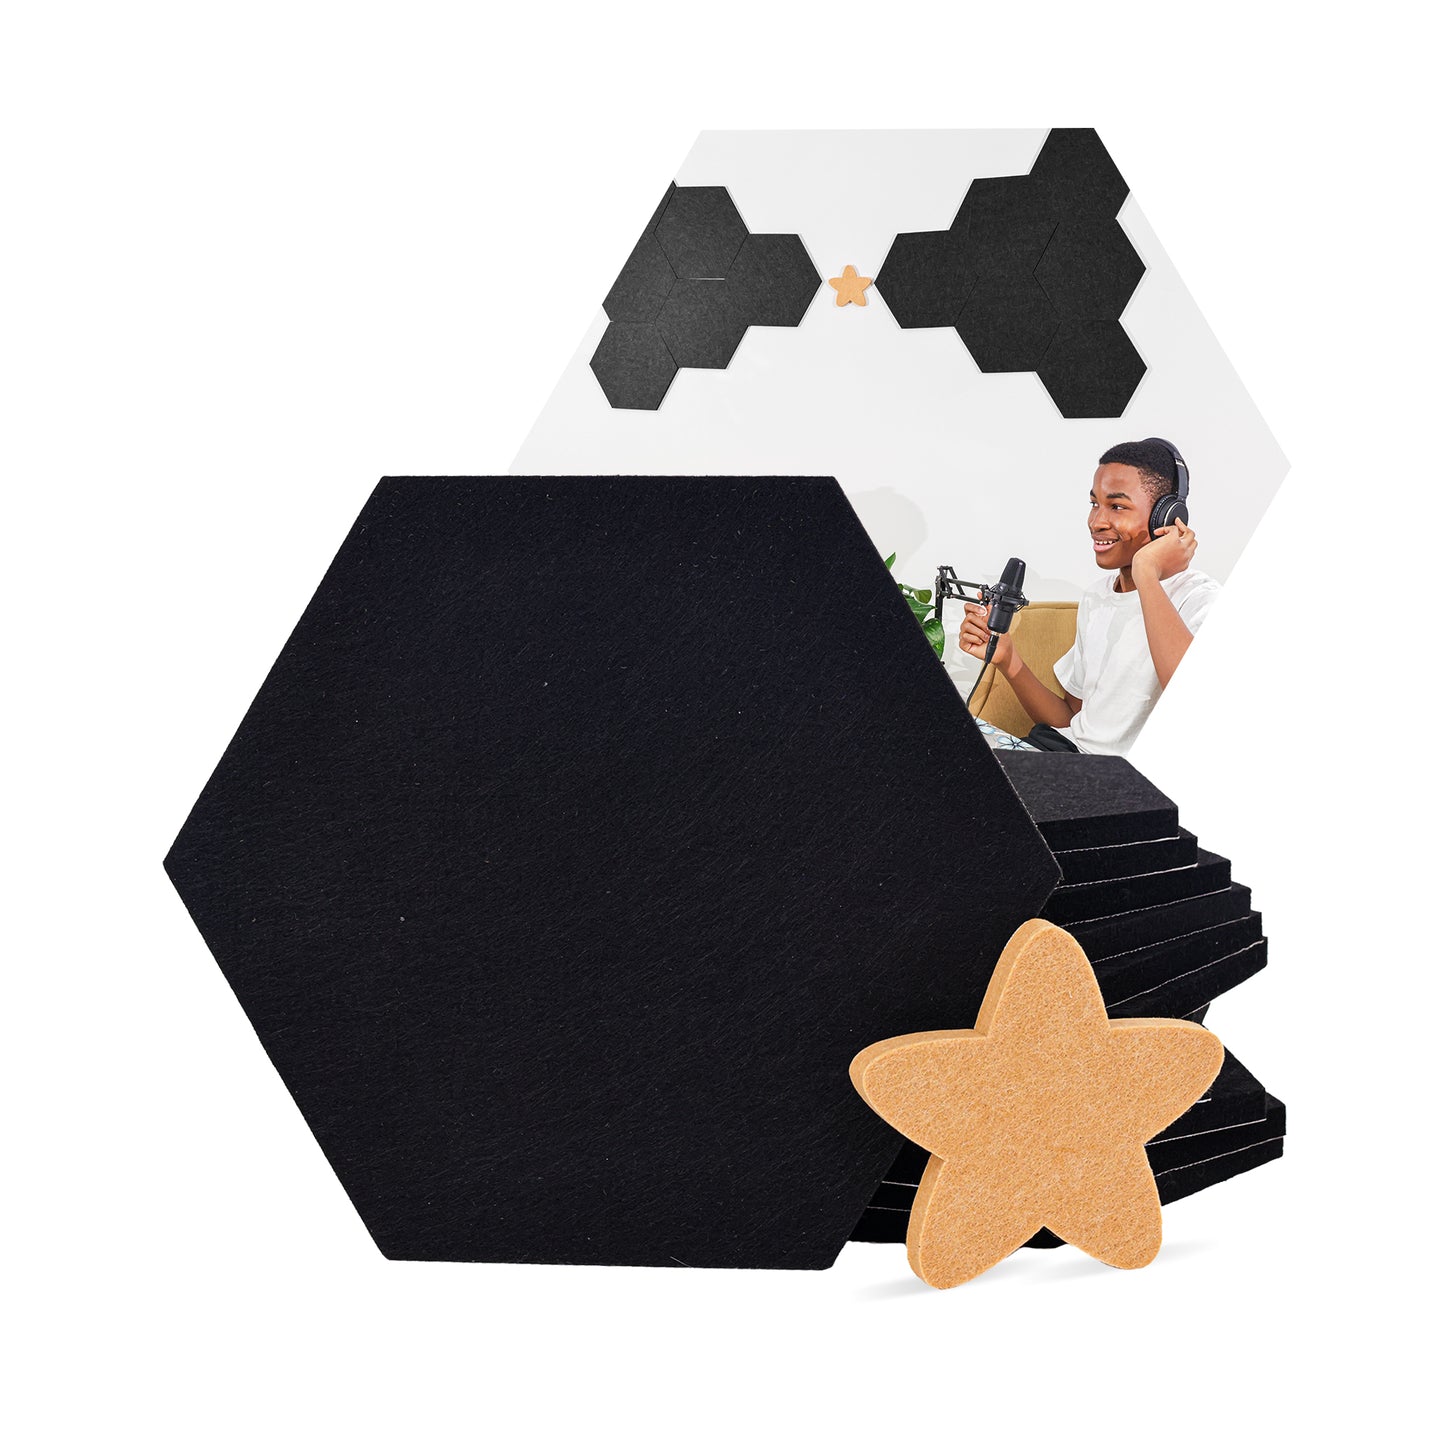 12 Pack Self-Adhesive Hexagon Sound Proof Foam Panels - 12x10 inches